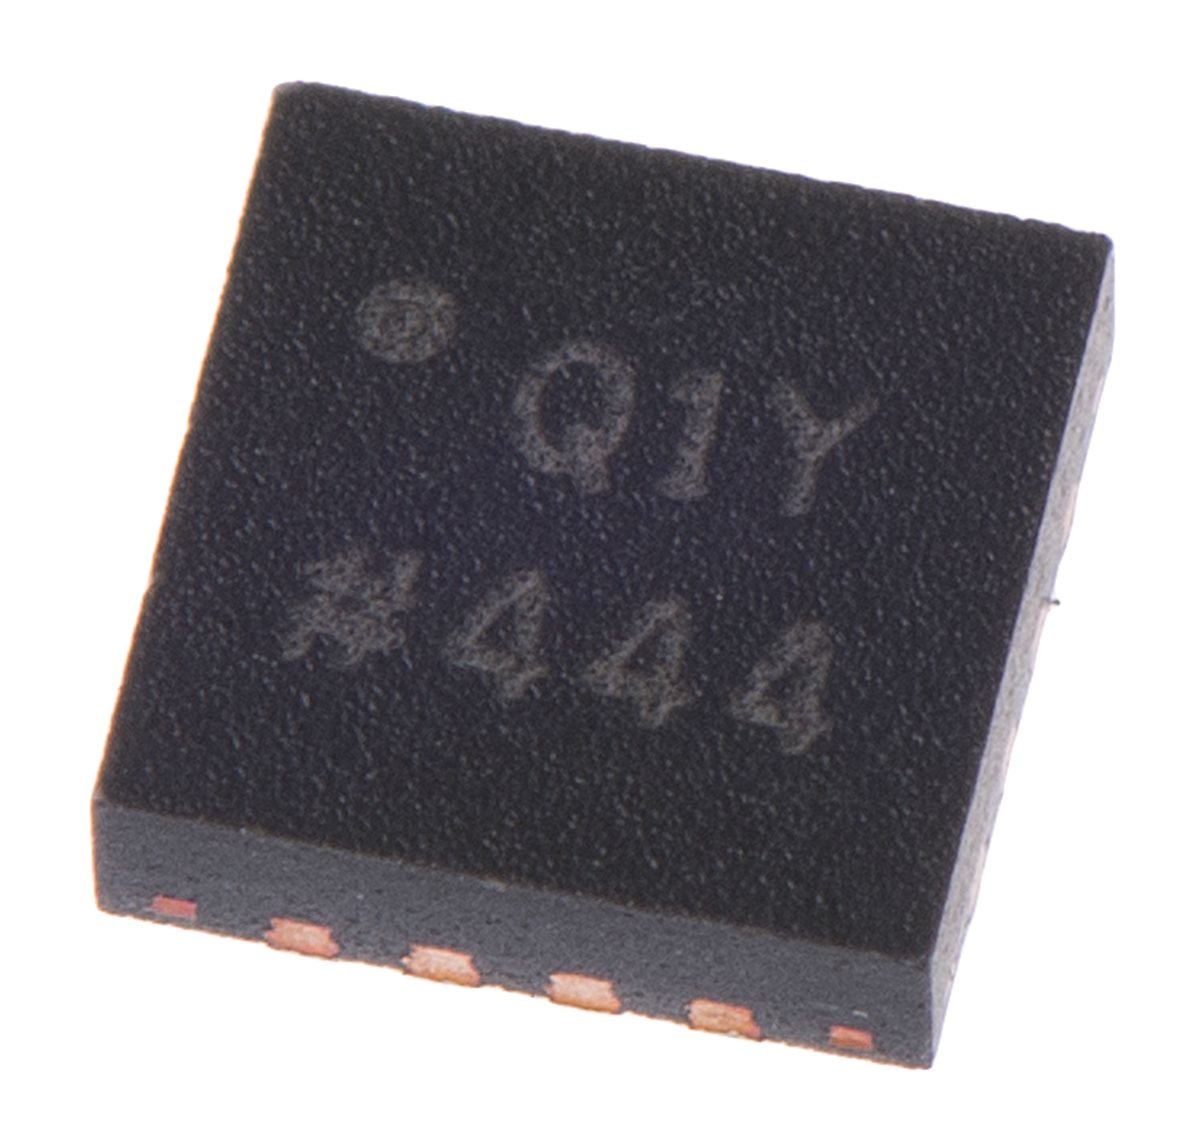 ADL5511ACPZ-R7 Analog Devices, RF Amplifier RF Power Detector 2-Channel 6 GHz, 16-Pin LFCSP